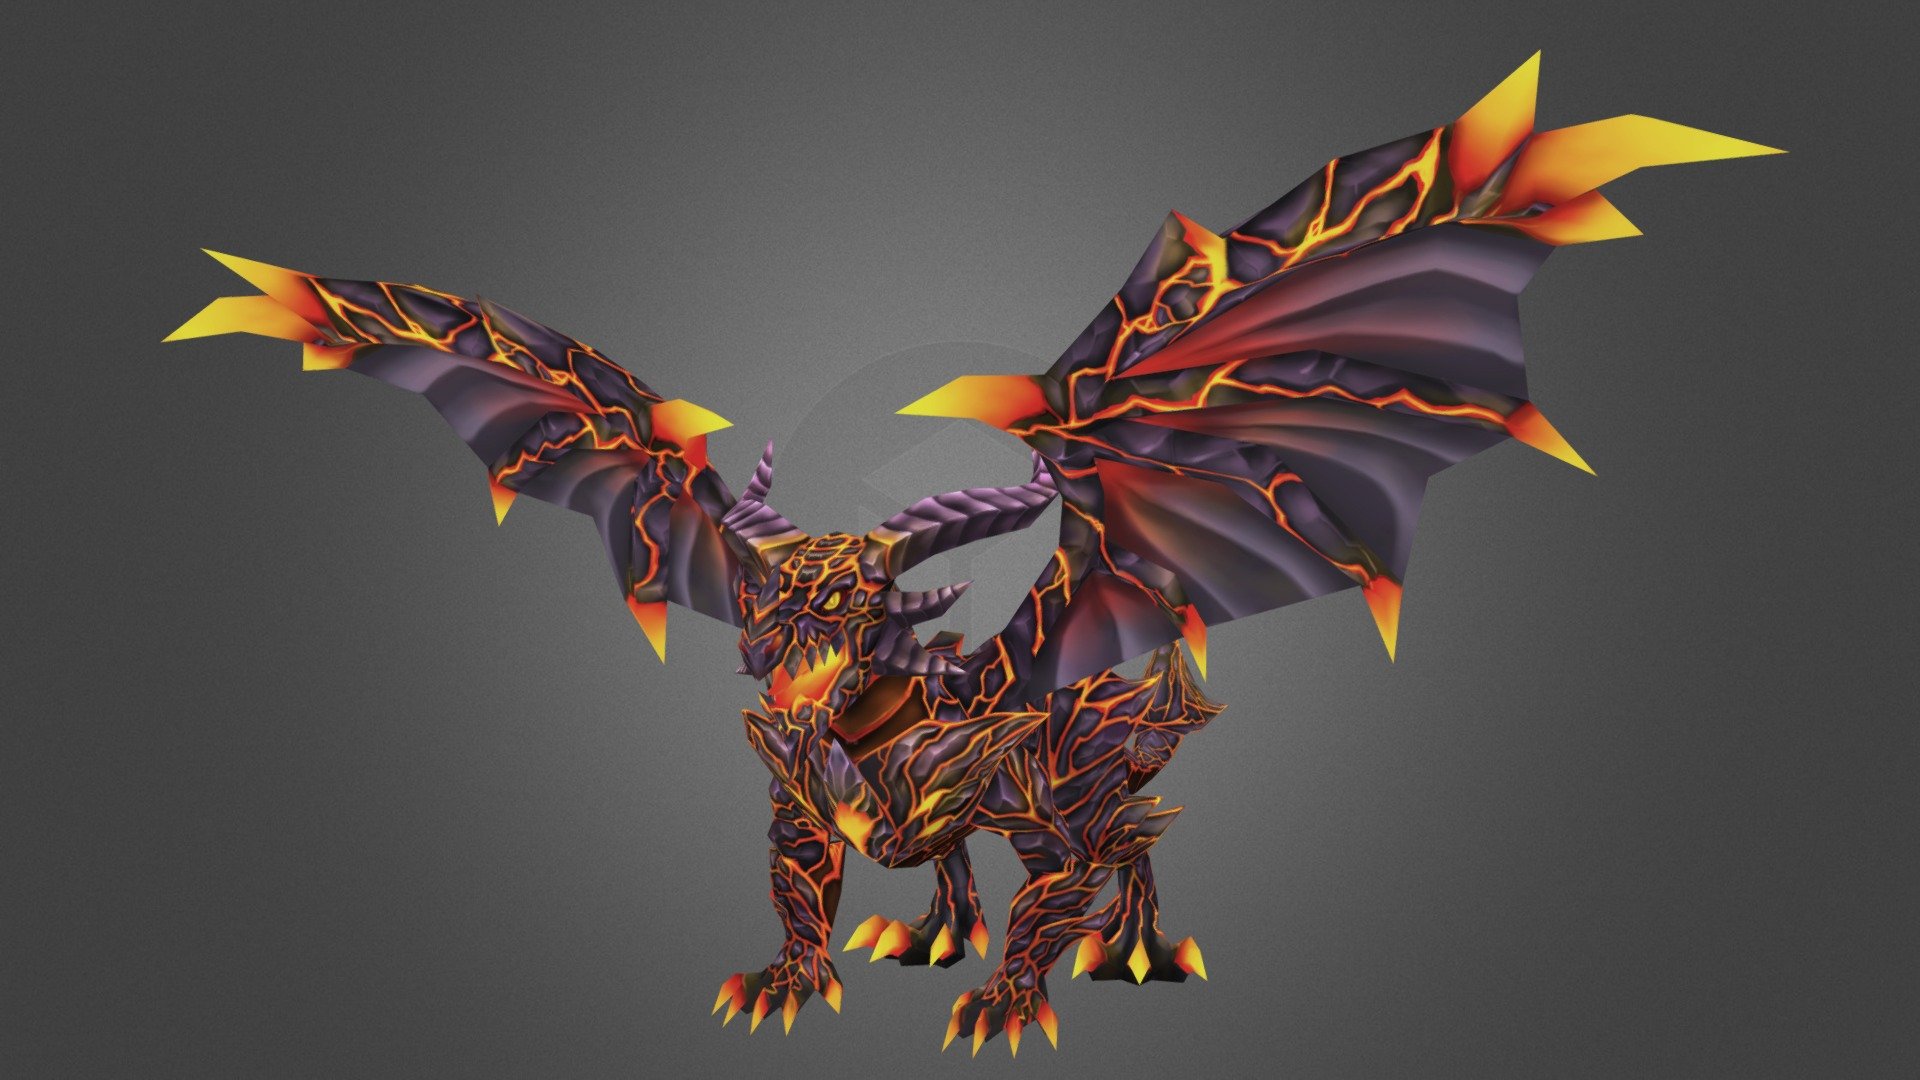 lava dragon for a mobile game asset. using 3dmax and hand painted in photoshop 3d model